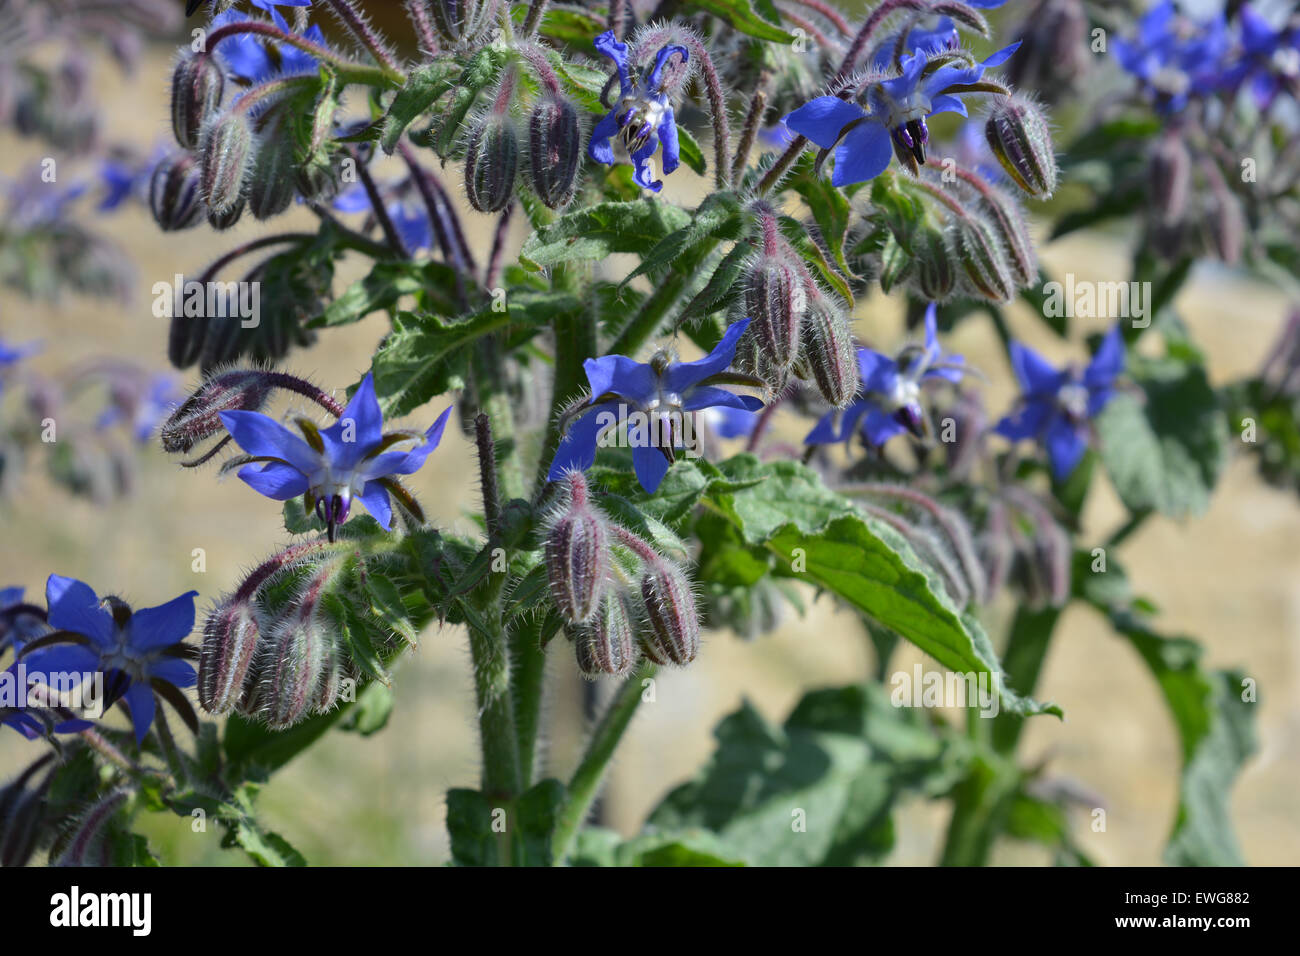 Borage, also known as  starflower. Leaves and flowers can be used in salads and drinks Stock Photo